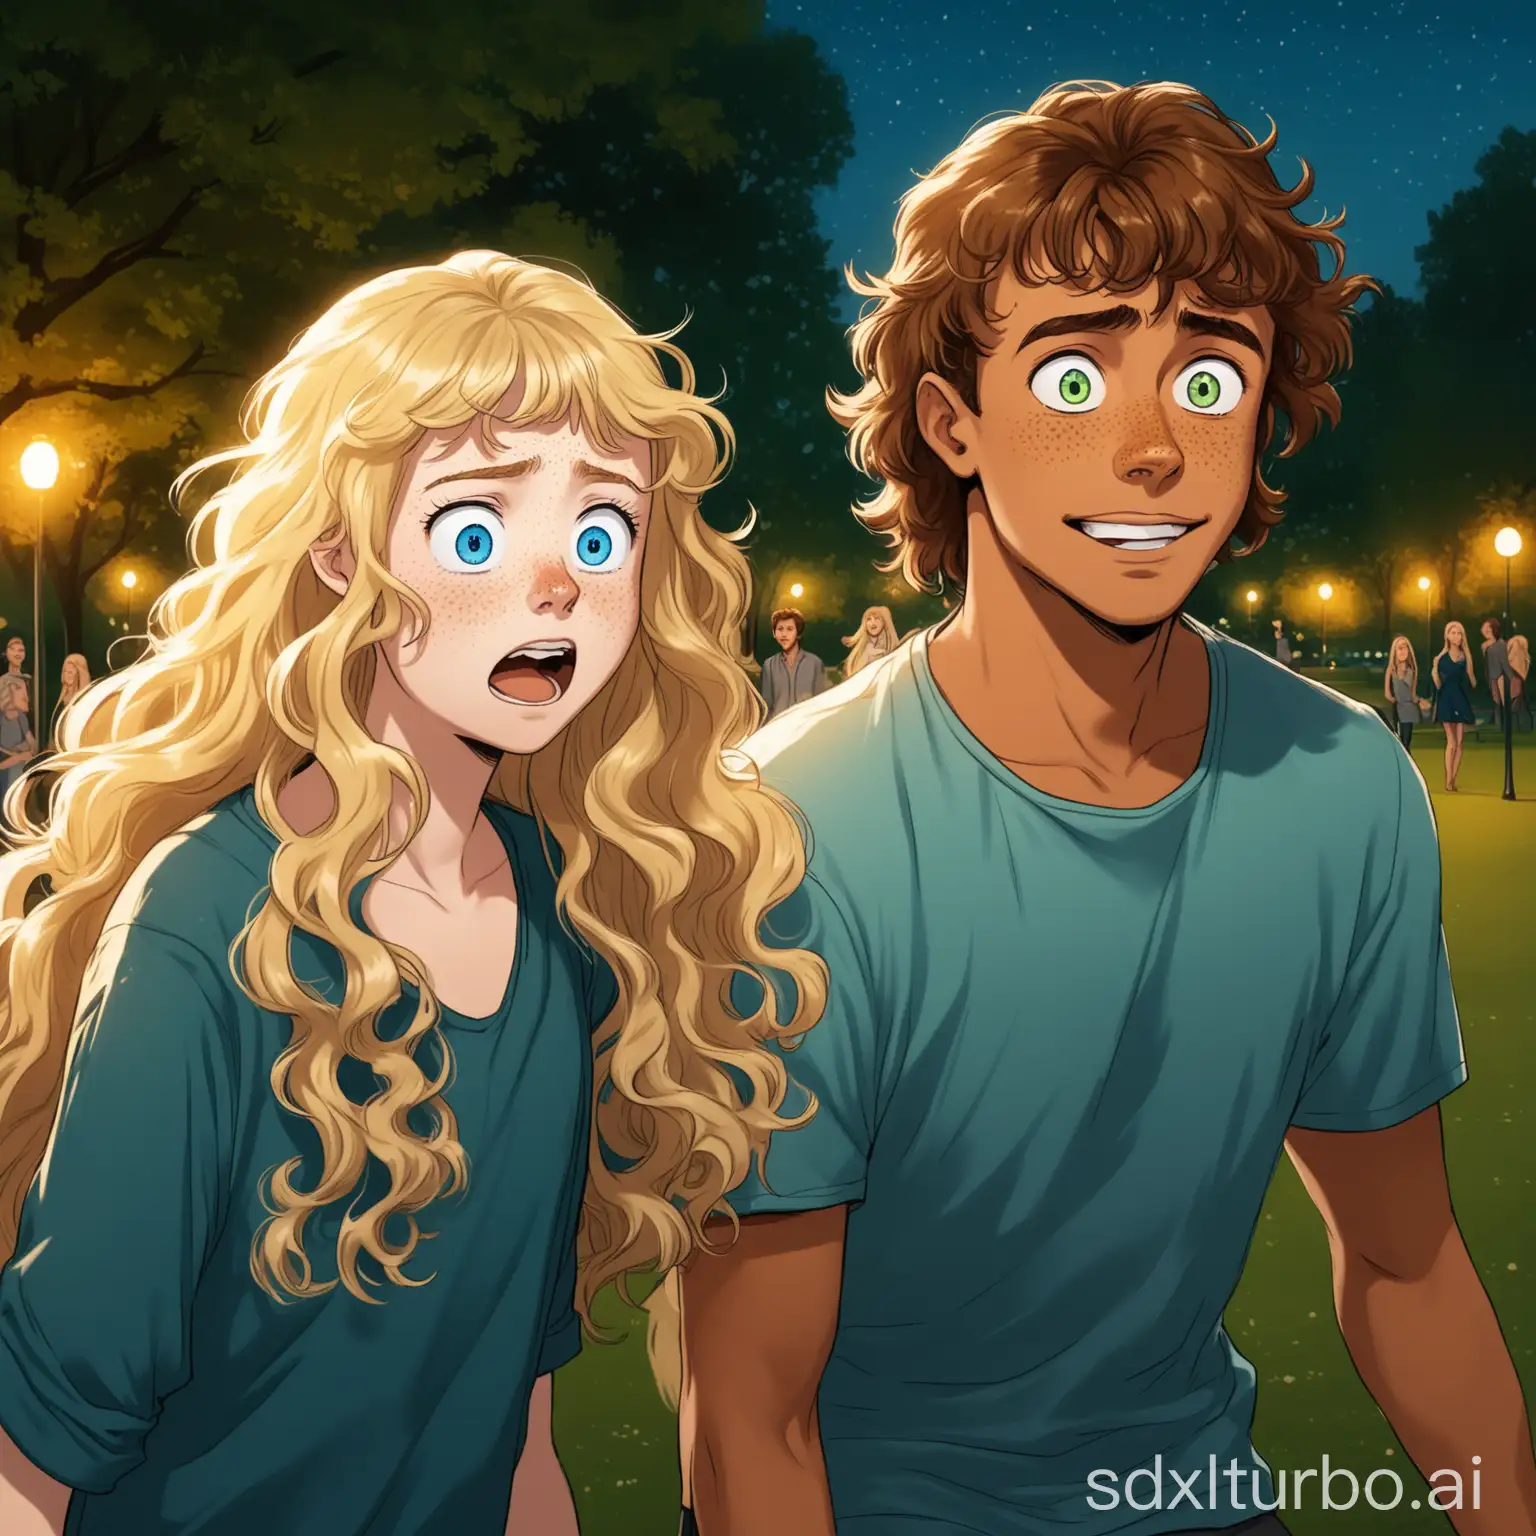 a handsome tanned young man with brown mullet hair and green eyes, making fun with a Scandinavian blonde girl with blue eyes, frizzy long hair and bangs, freckles, rolling eyes expression, in the evening of a park, full view